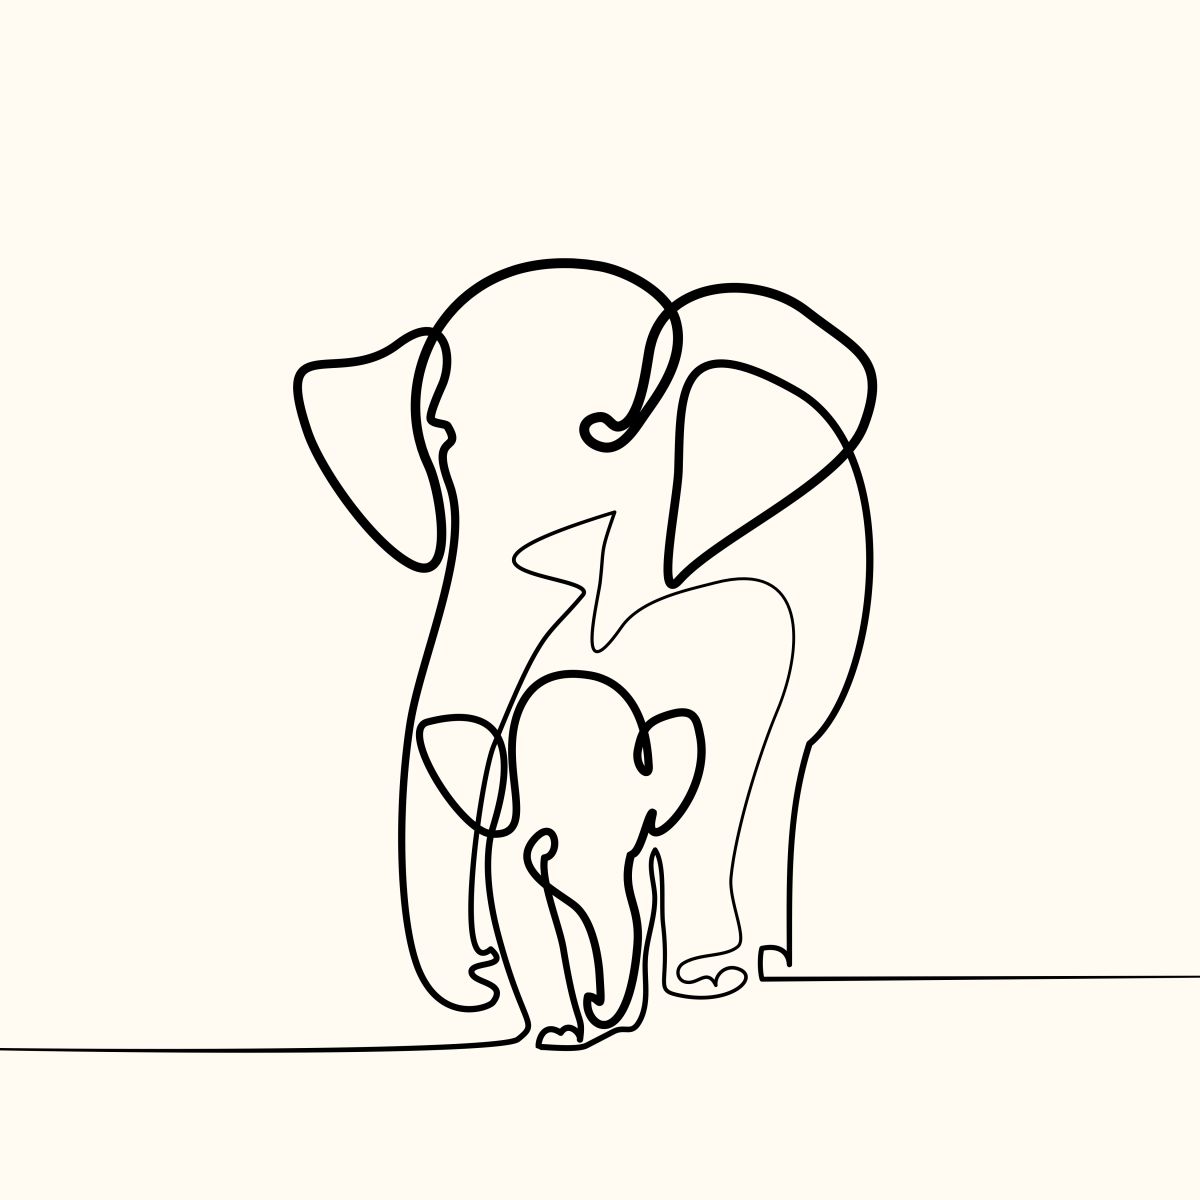 Elephant And Baby